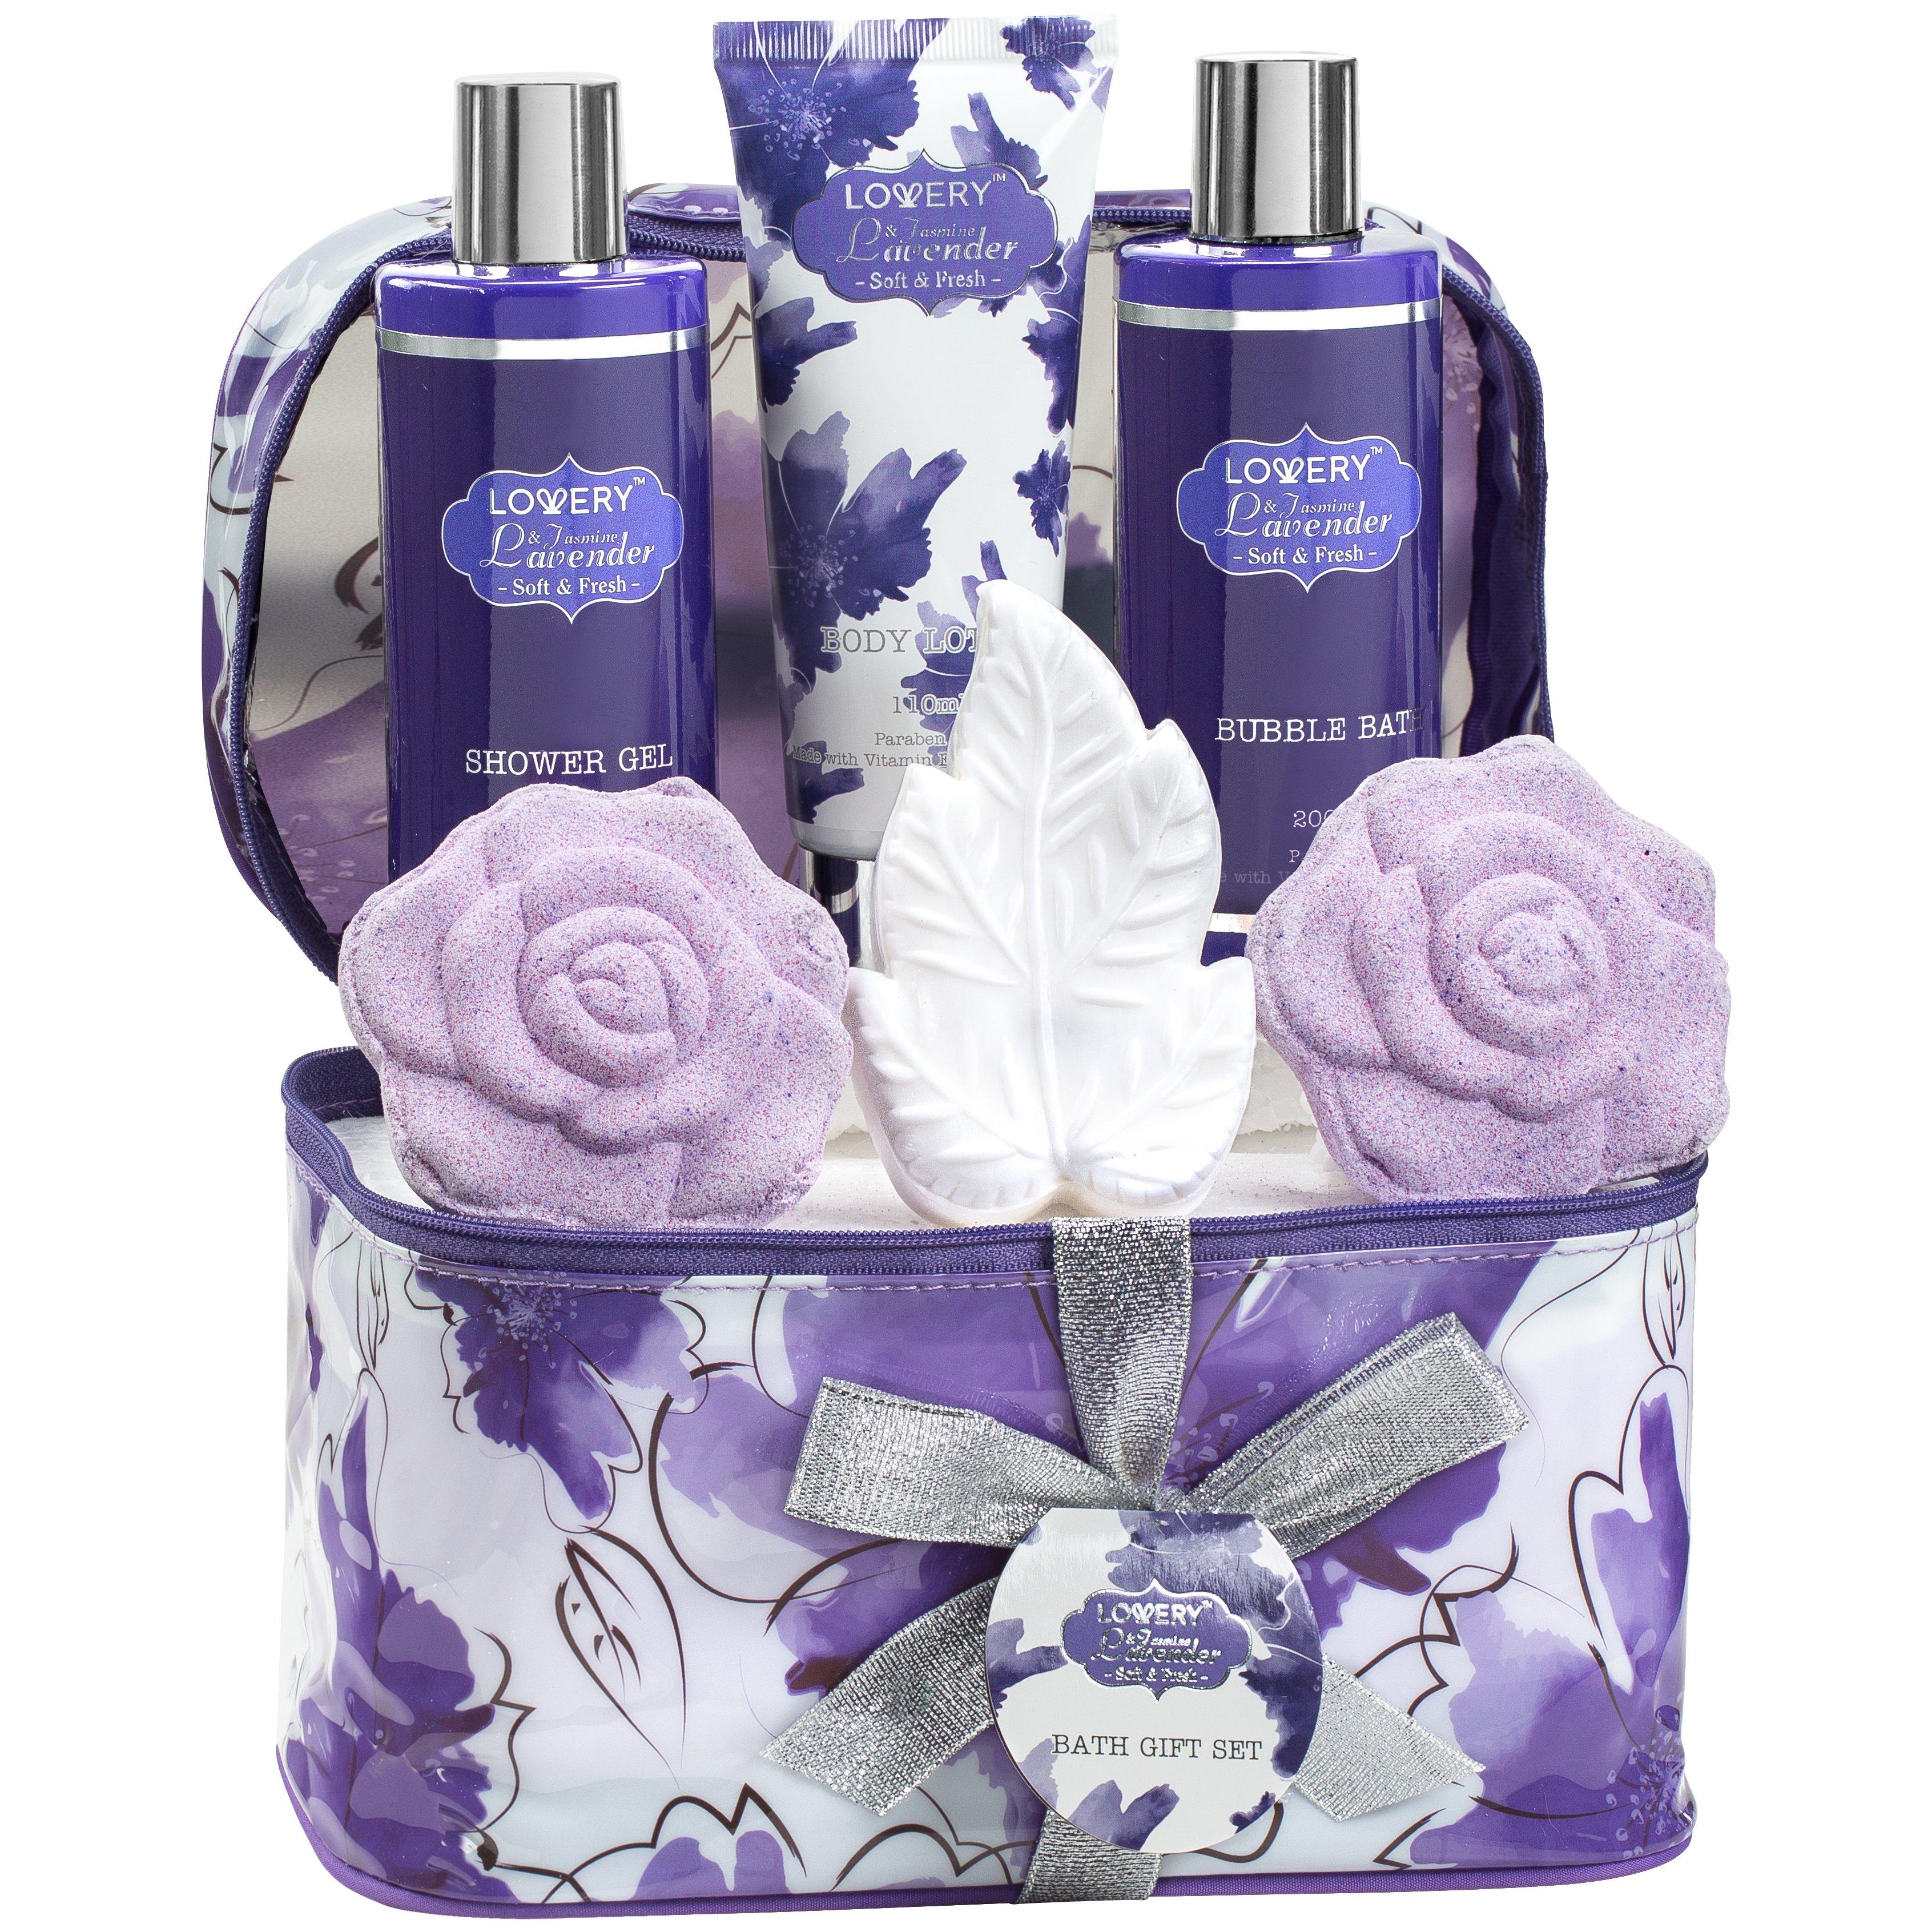 Lavender and Jasmine Scent | Home Bath Gift Set | Lovery.com